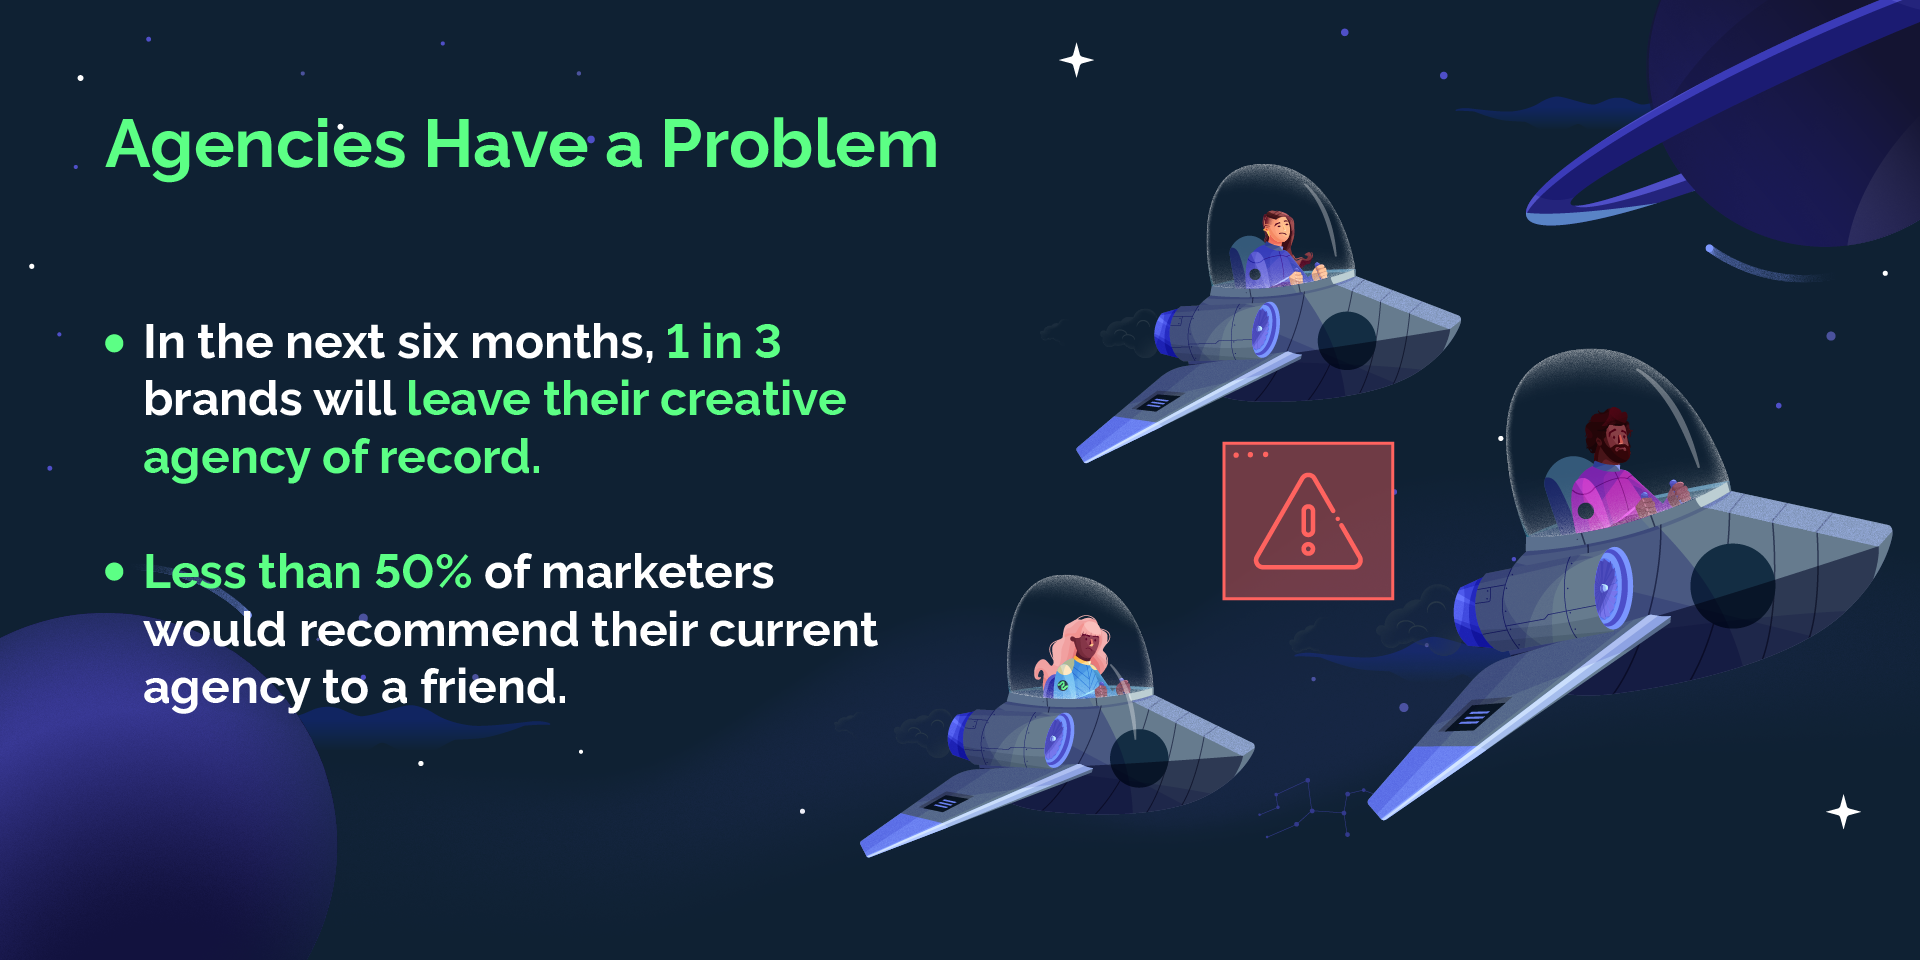 An infographic with the statistics that 1 in 3 brands will leave their agencies of record in the next 6 months and less than 50% would recommend their current agency to a friend. 